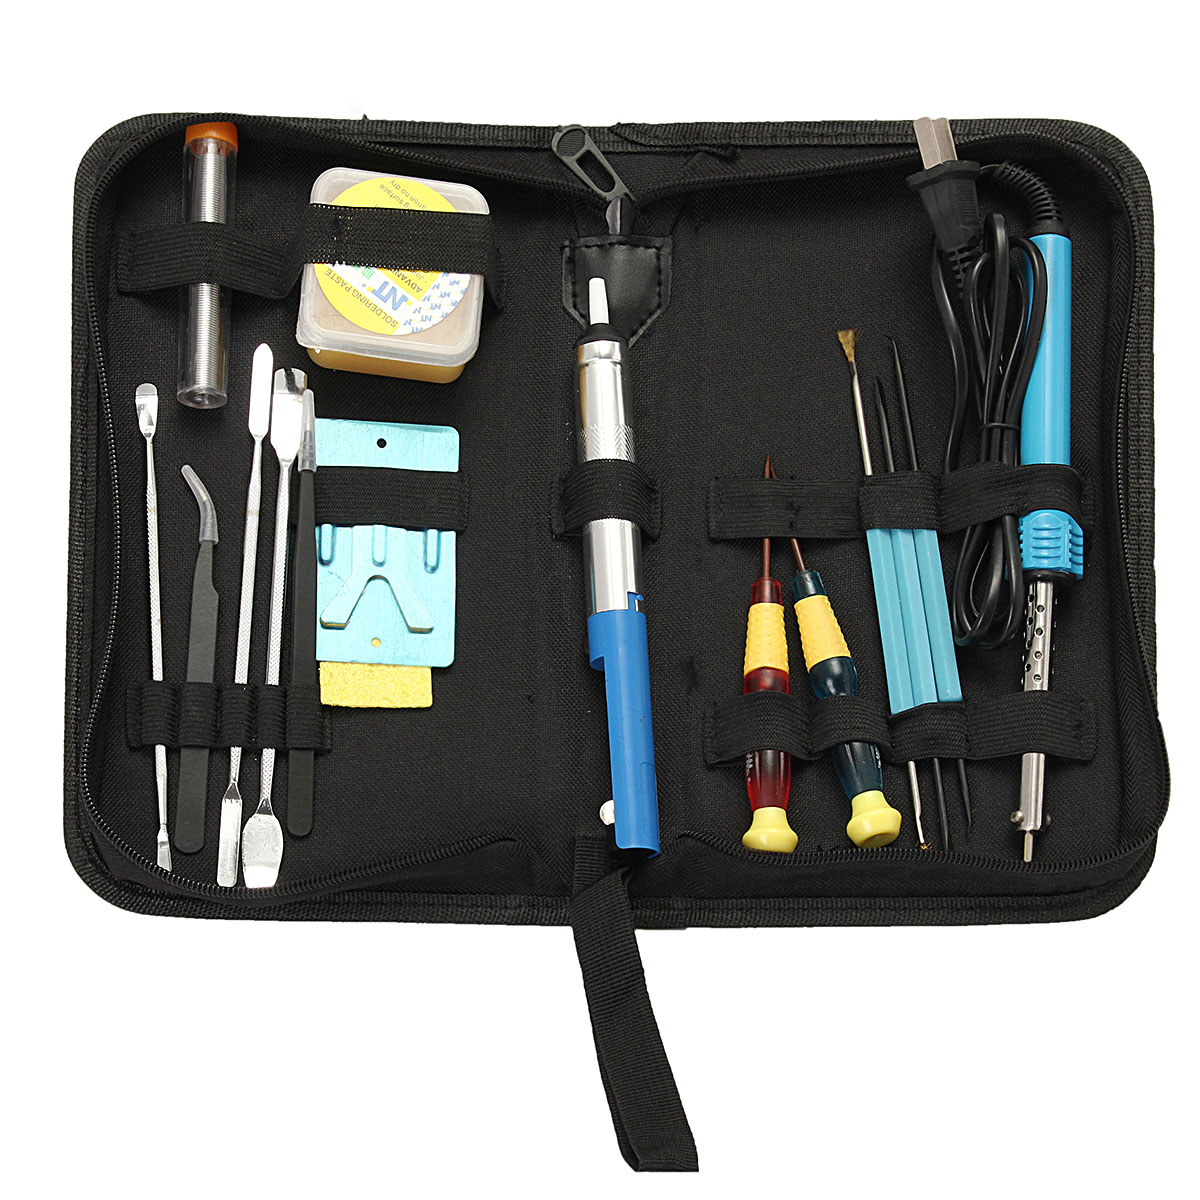 17in1-Electric-Soldering-Tools-Kit-Set-Iron-Stand-Desoldering-Pump-30W-110V-1300343-1